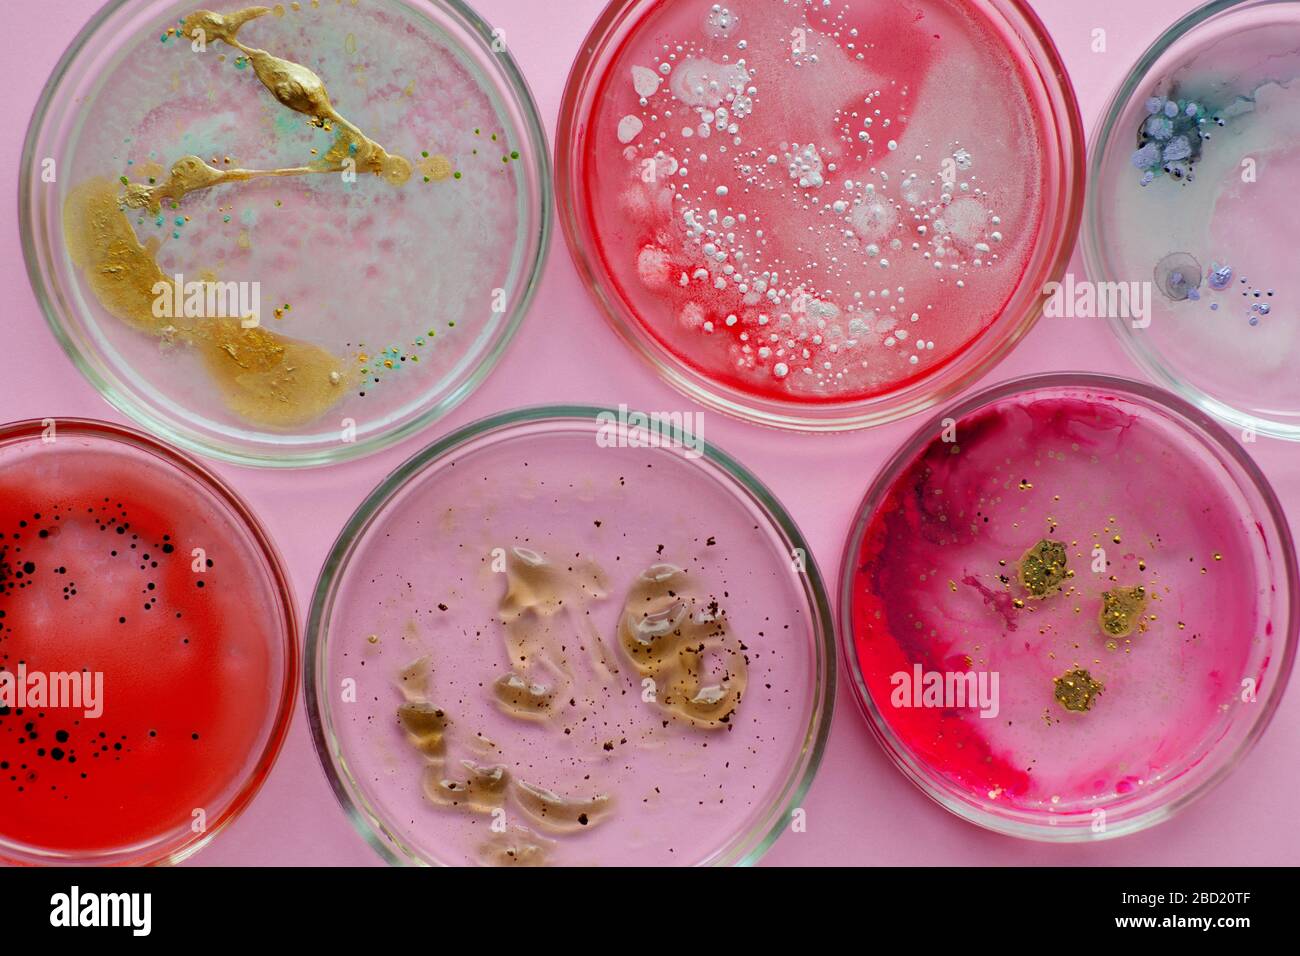 Growth of different bacterial cultures, concept. Bacteriological examination. Harmful and beneficial bacteria, microflora of humans. Stock Photo